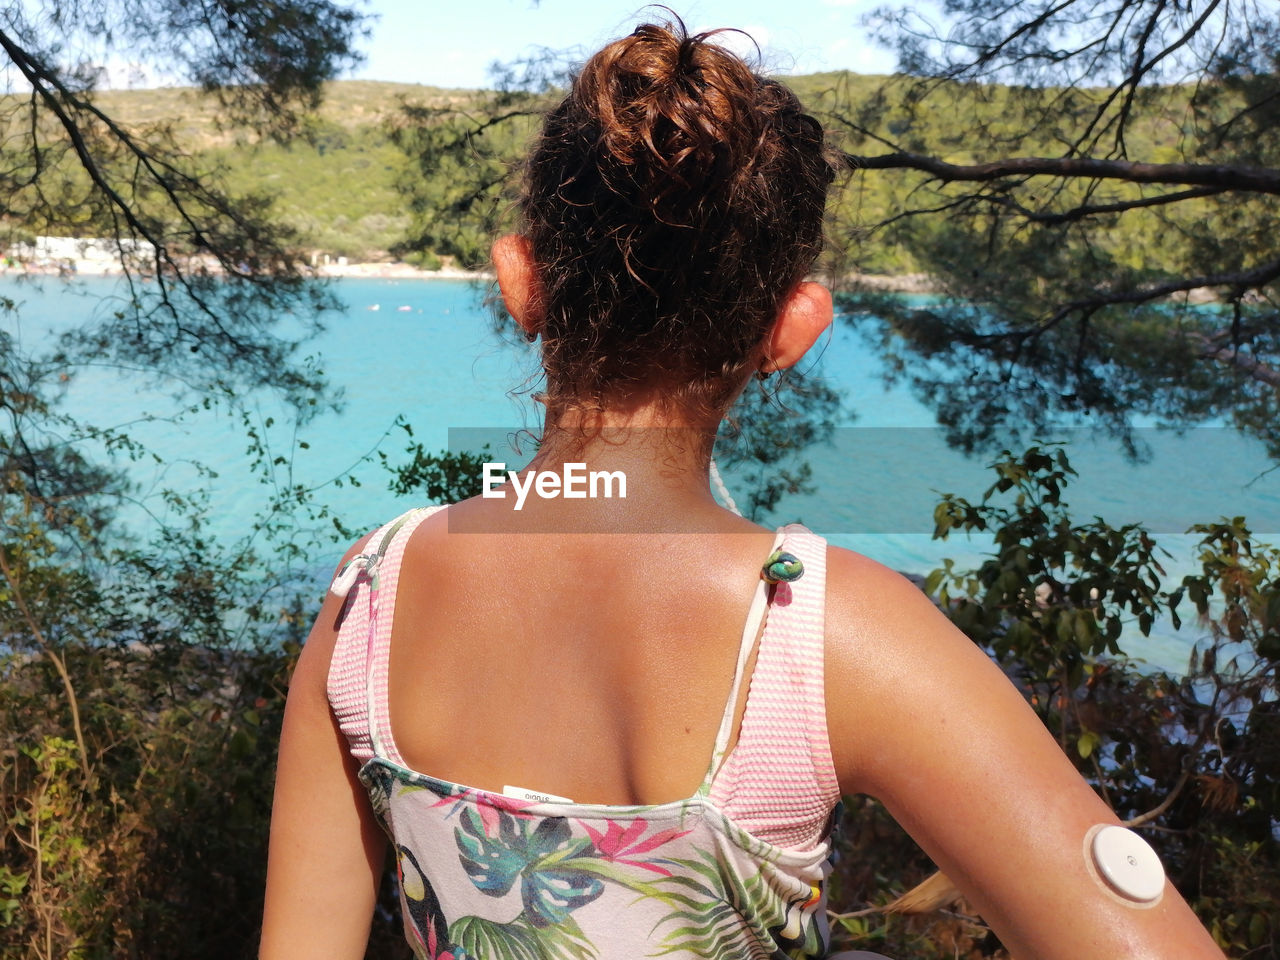 Girl with diabetes looks at the turquoise sea. on right arm is placed white sensor for  cgm devise.